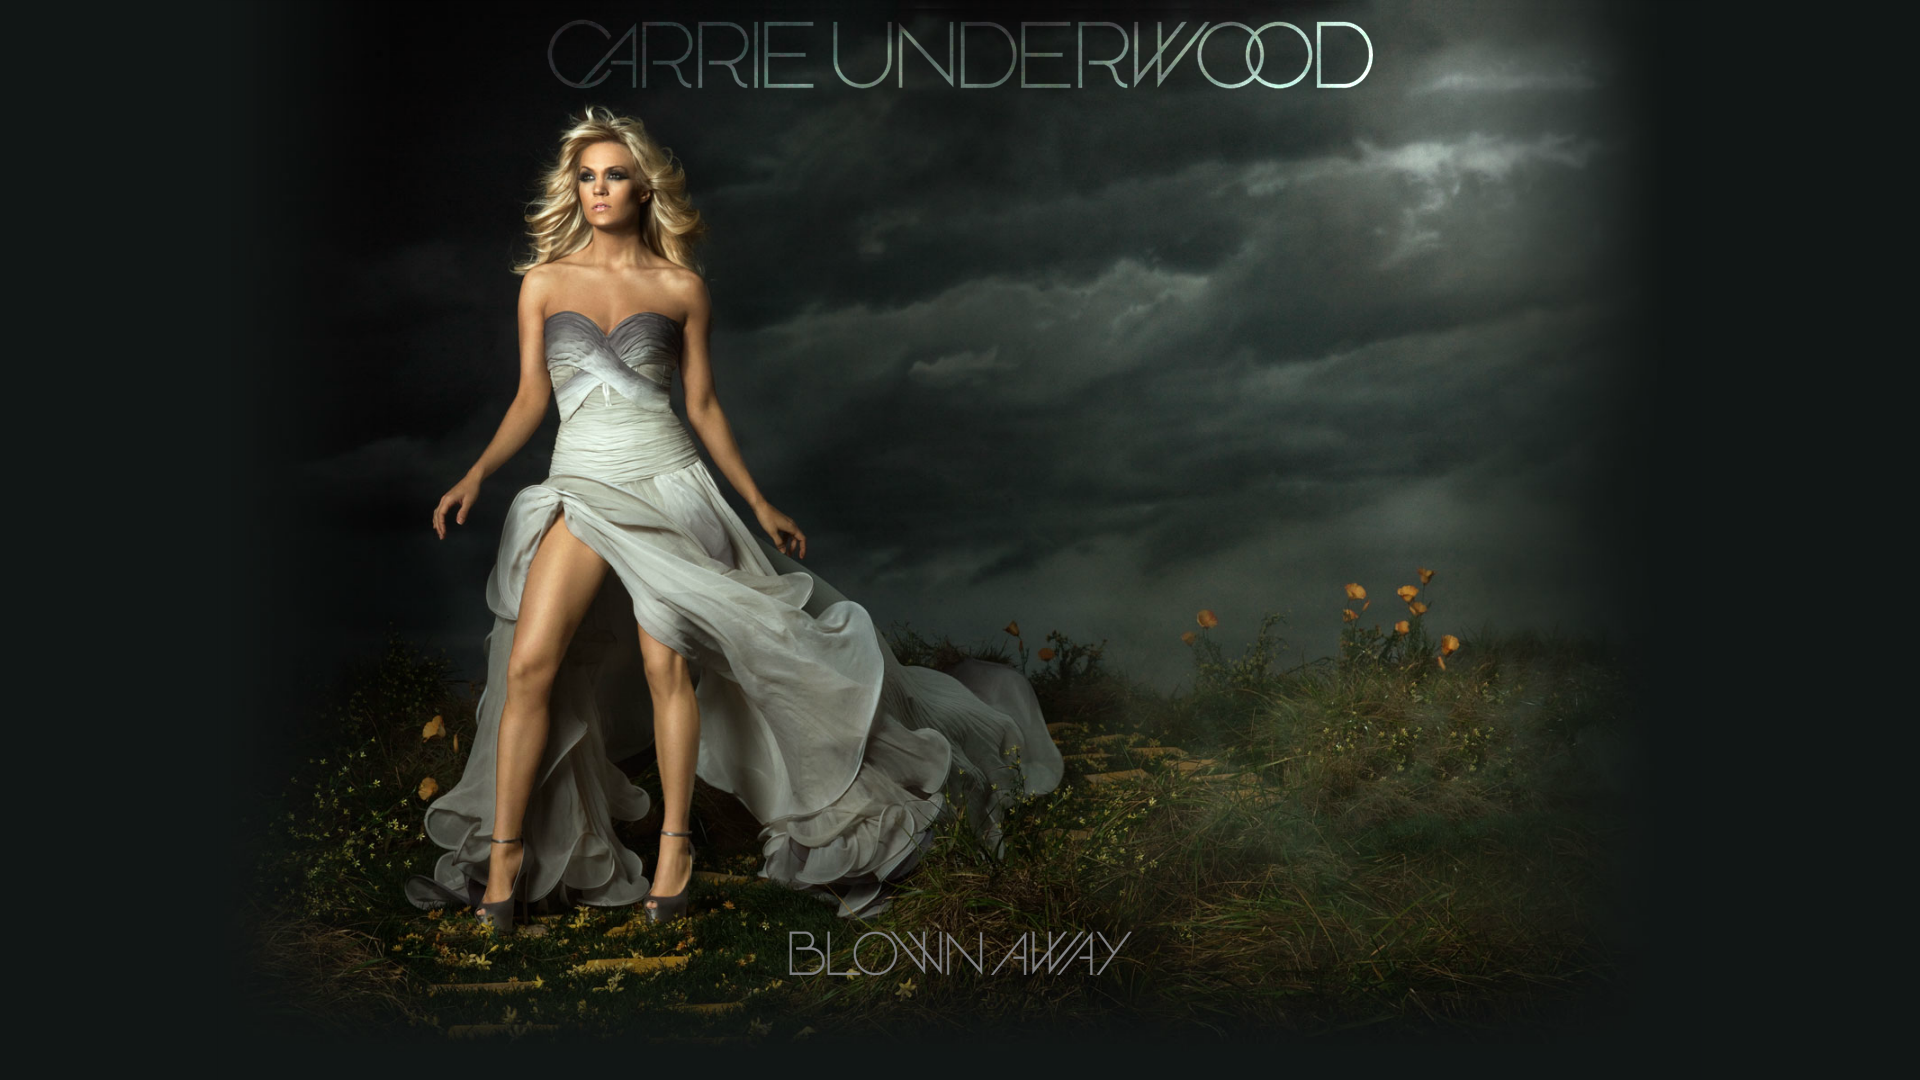 Carrie Underwood Blown Away Wallpaper By Adrianimpalamata On